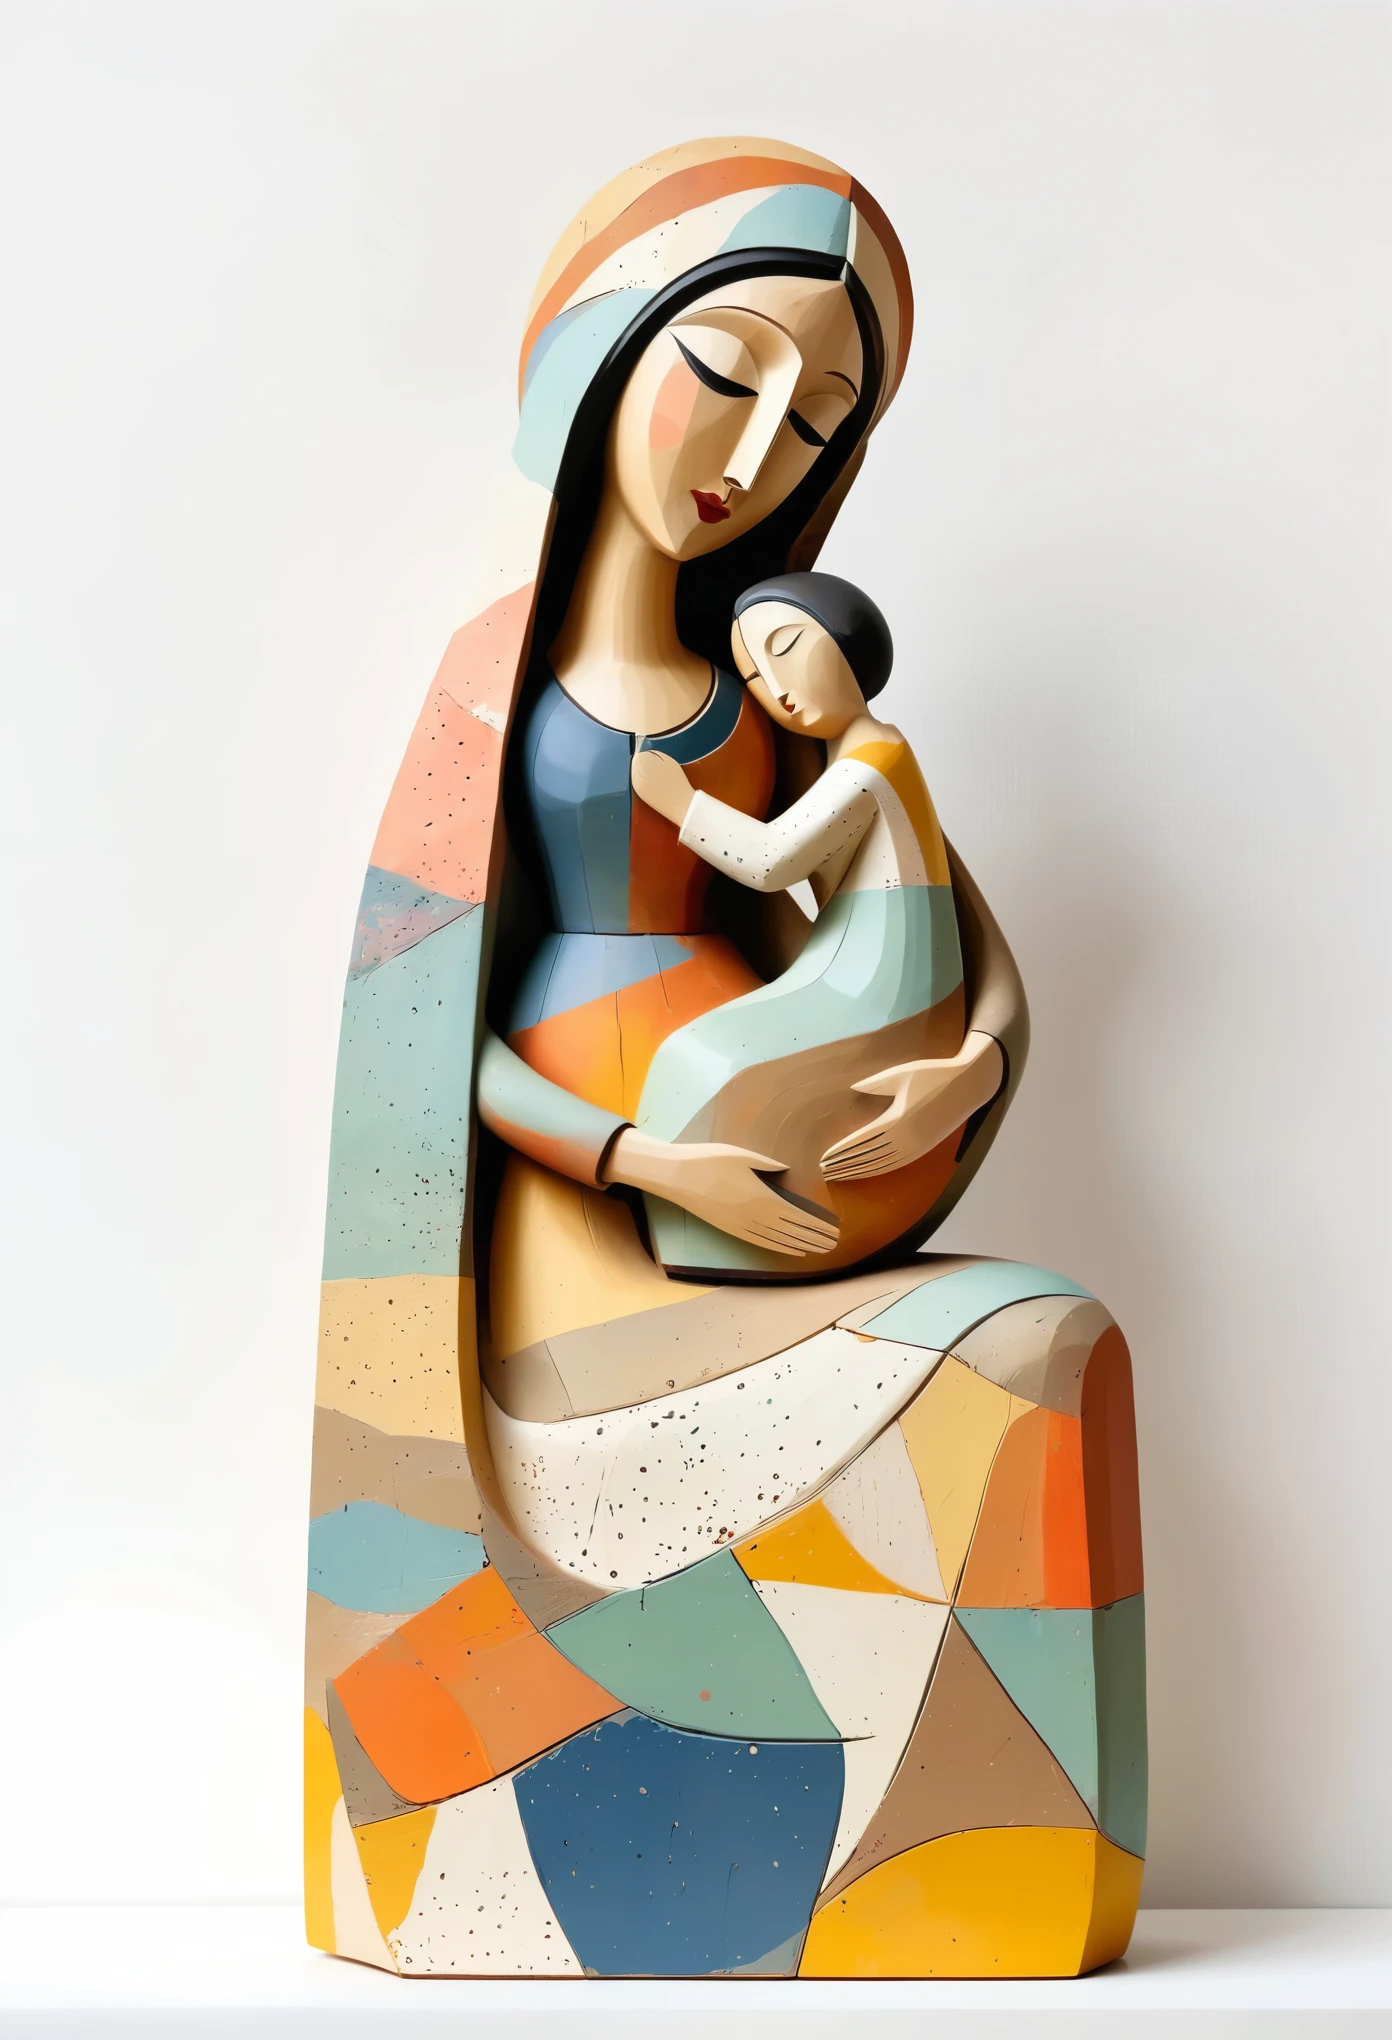 (masterpiece, best quality:1.2), Statue of the Virgin, child，color，Painted in earthy tones，With subtle patterns and textures，Invoking Ancient Wisdom. Focus on the face，With depth of field and bokeh effects. This is a high resolution image，Complex details，The background is dark，Soft lighting, style of. 
